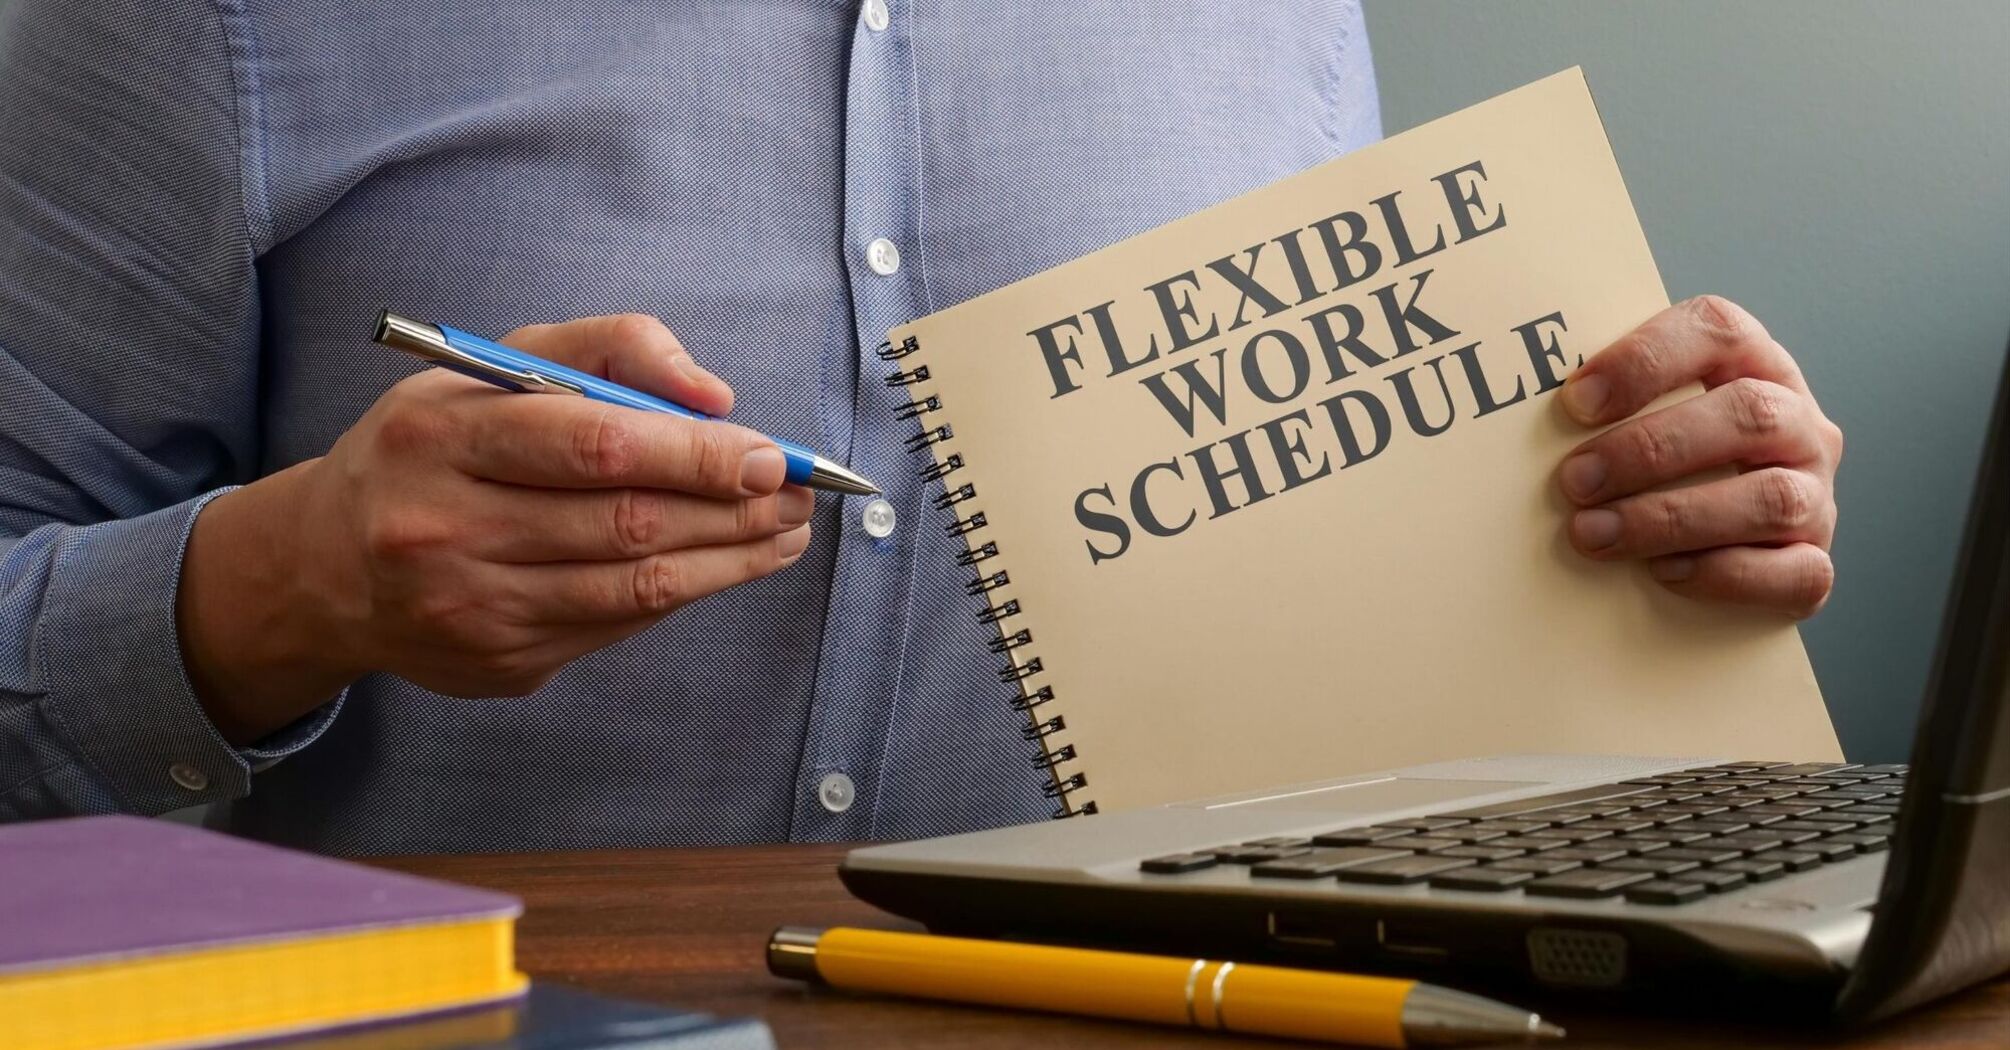 Advantages and disadvantages of flexible working hours